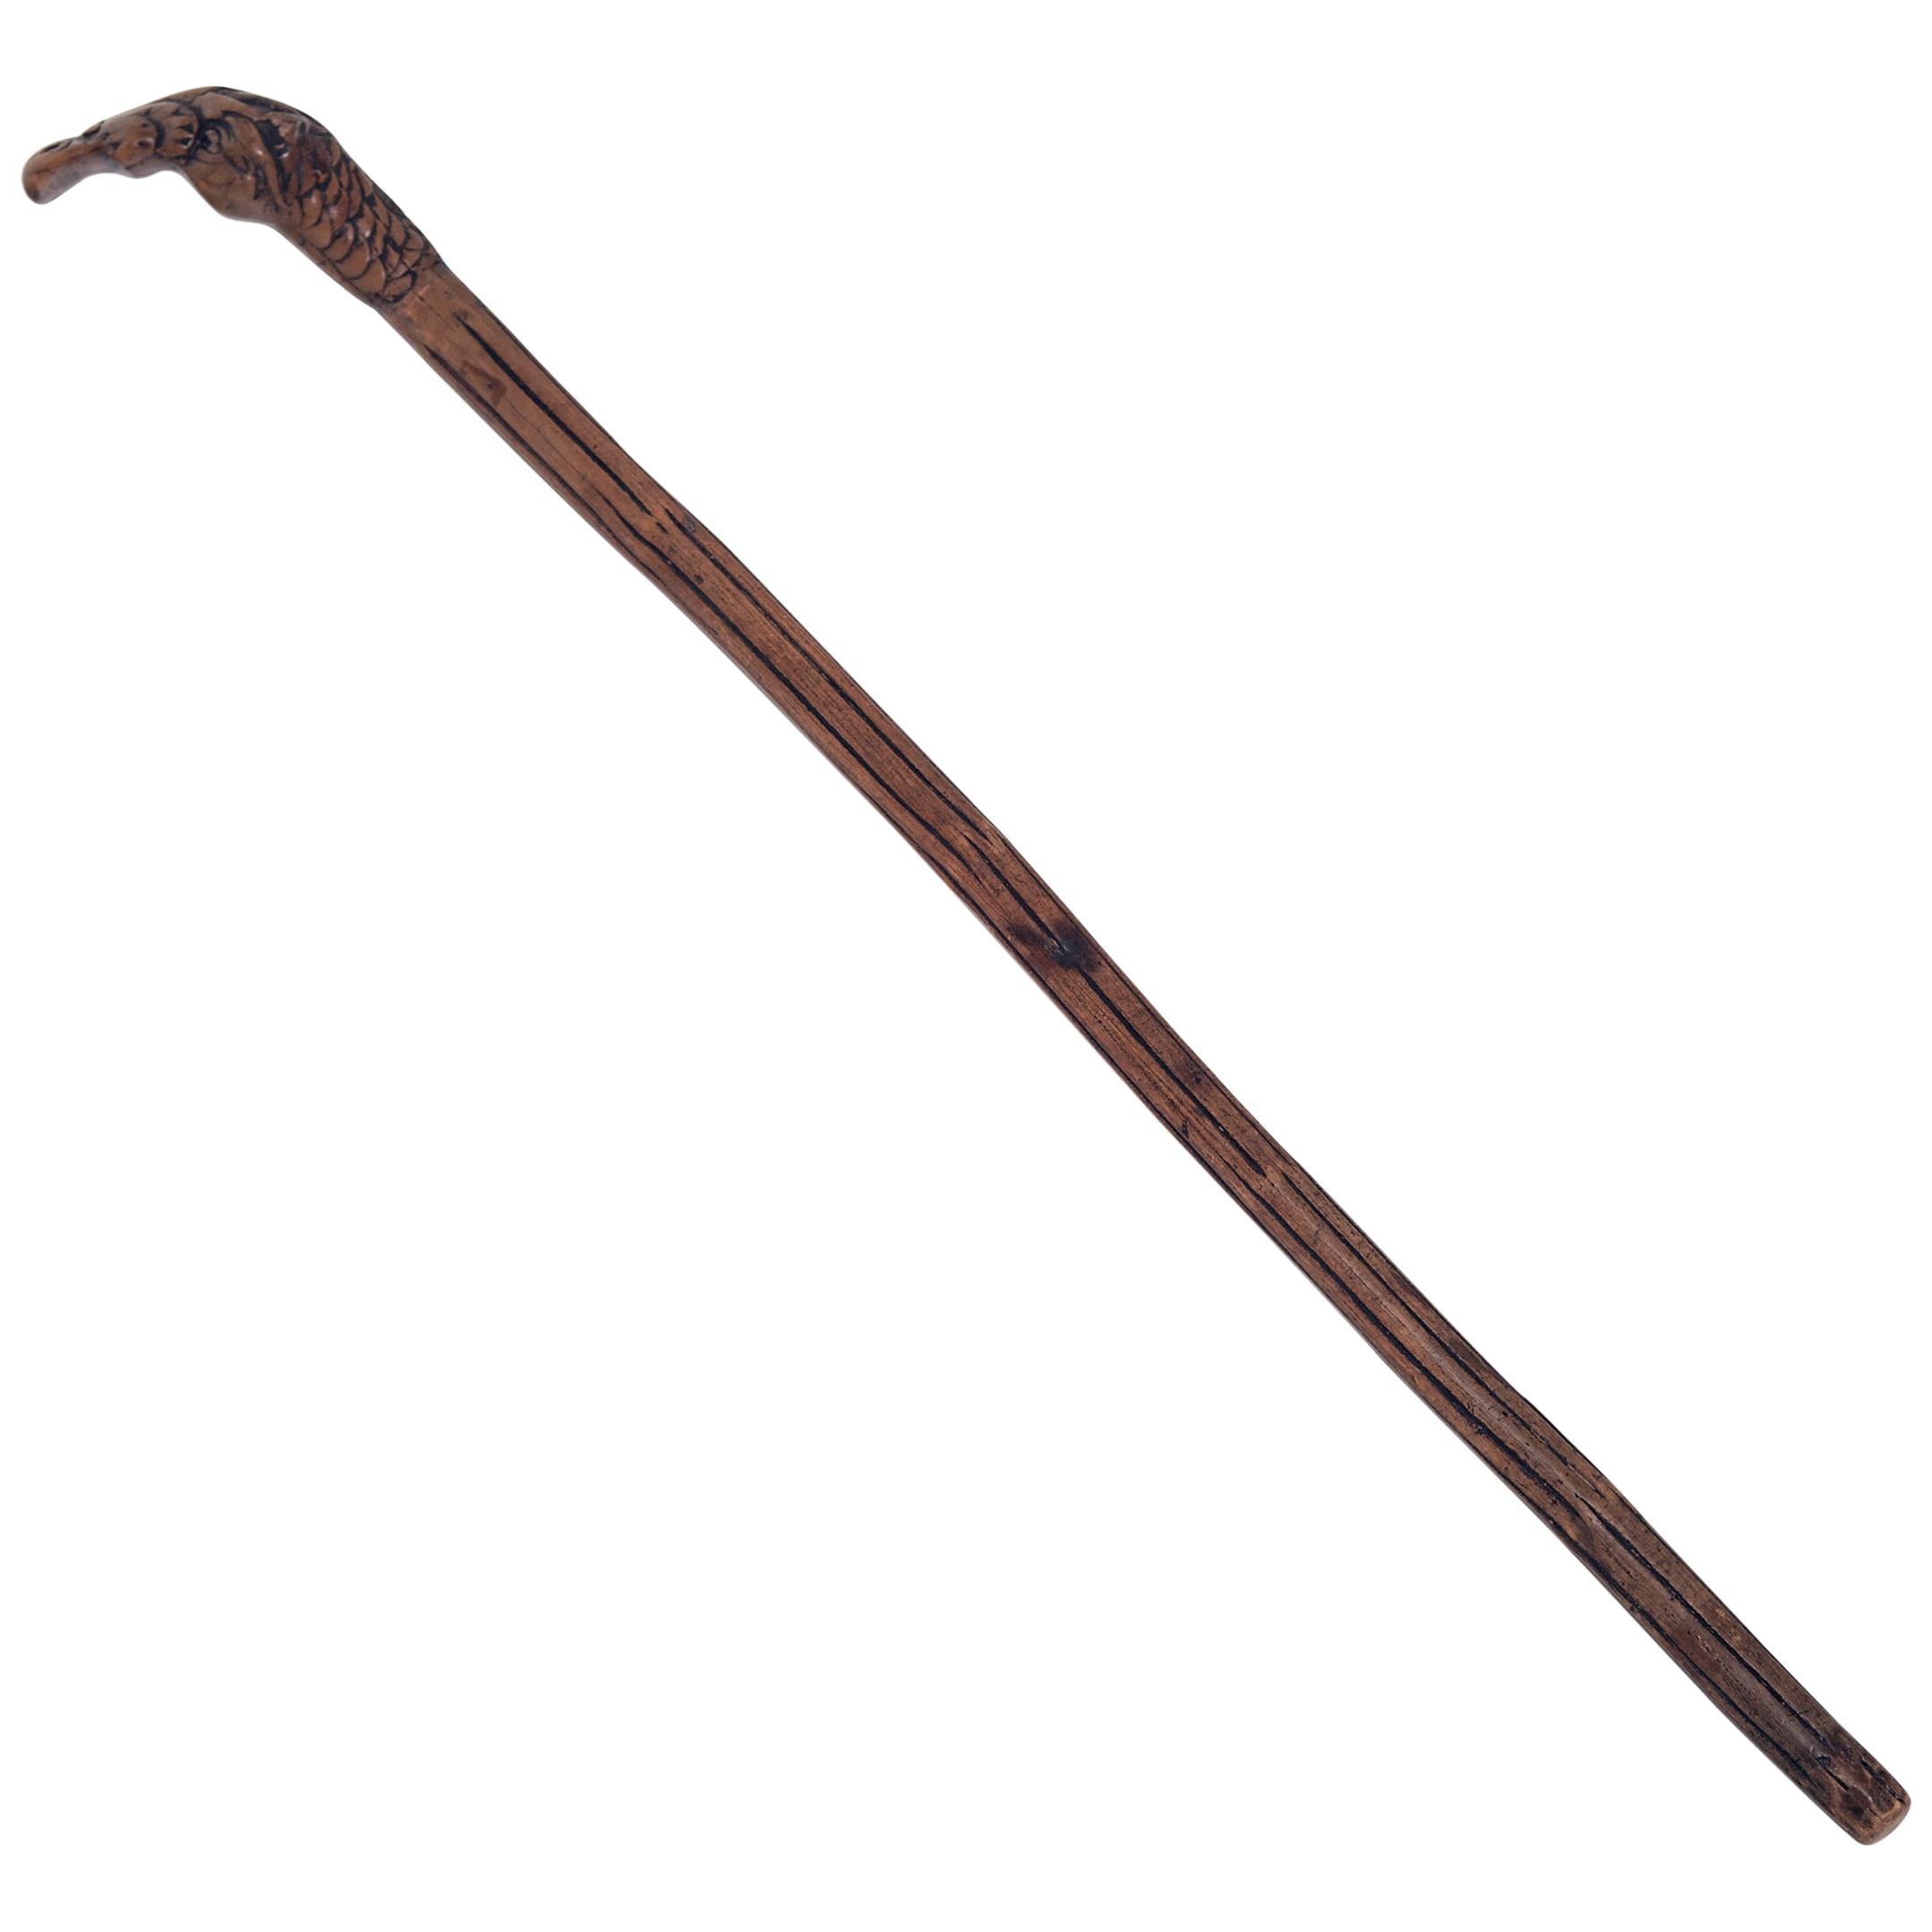 Chinese Walking Stick with Eagle Handle, c. 1850